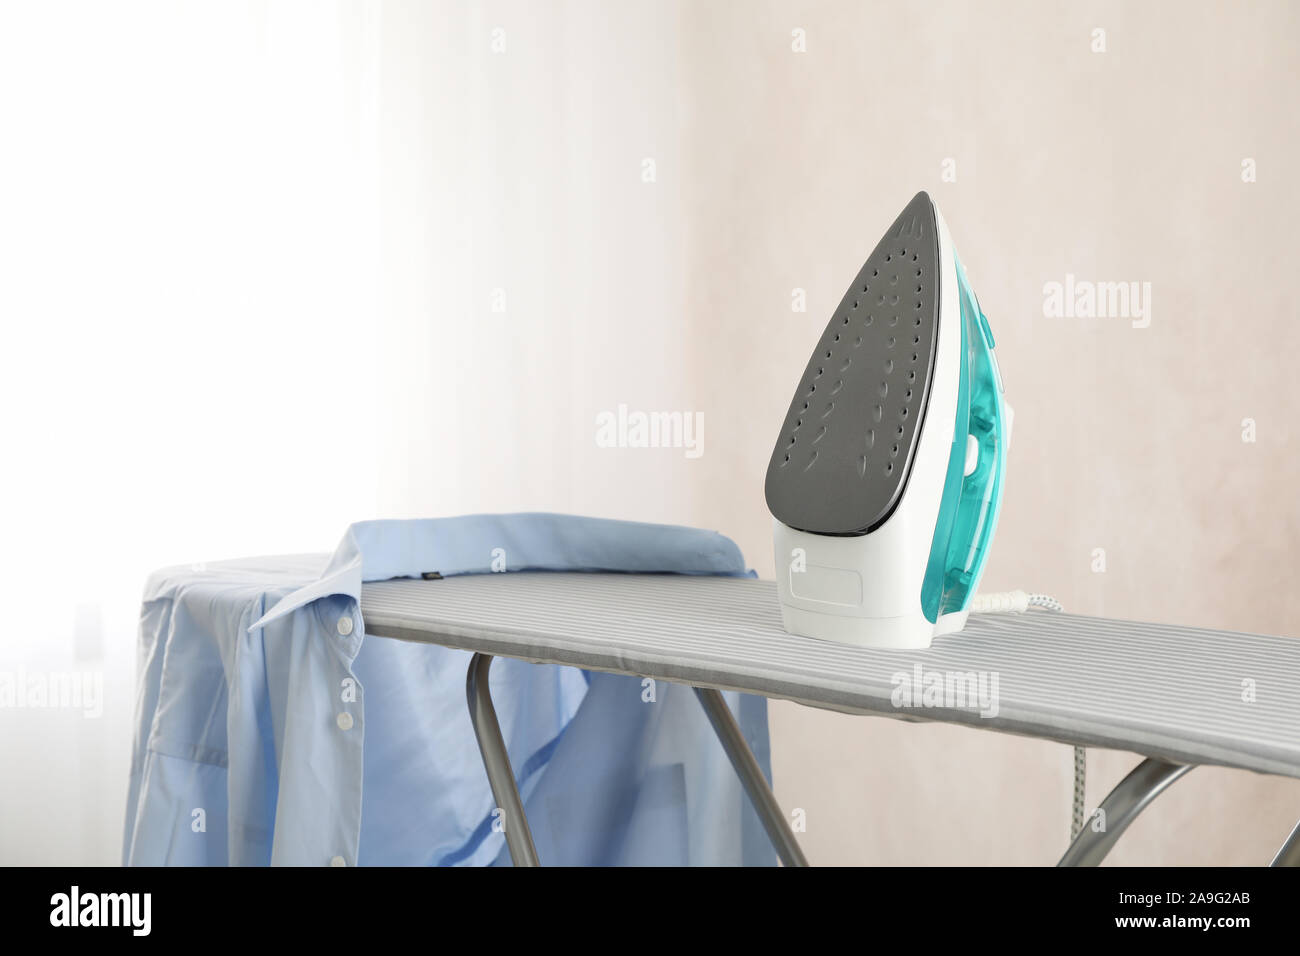 Iron and clean laundry on ironing board, space for text Stock Photo